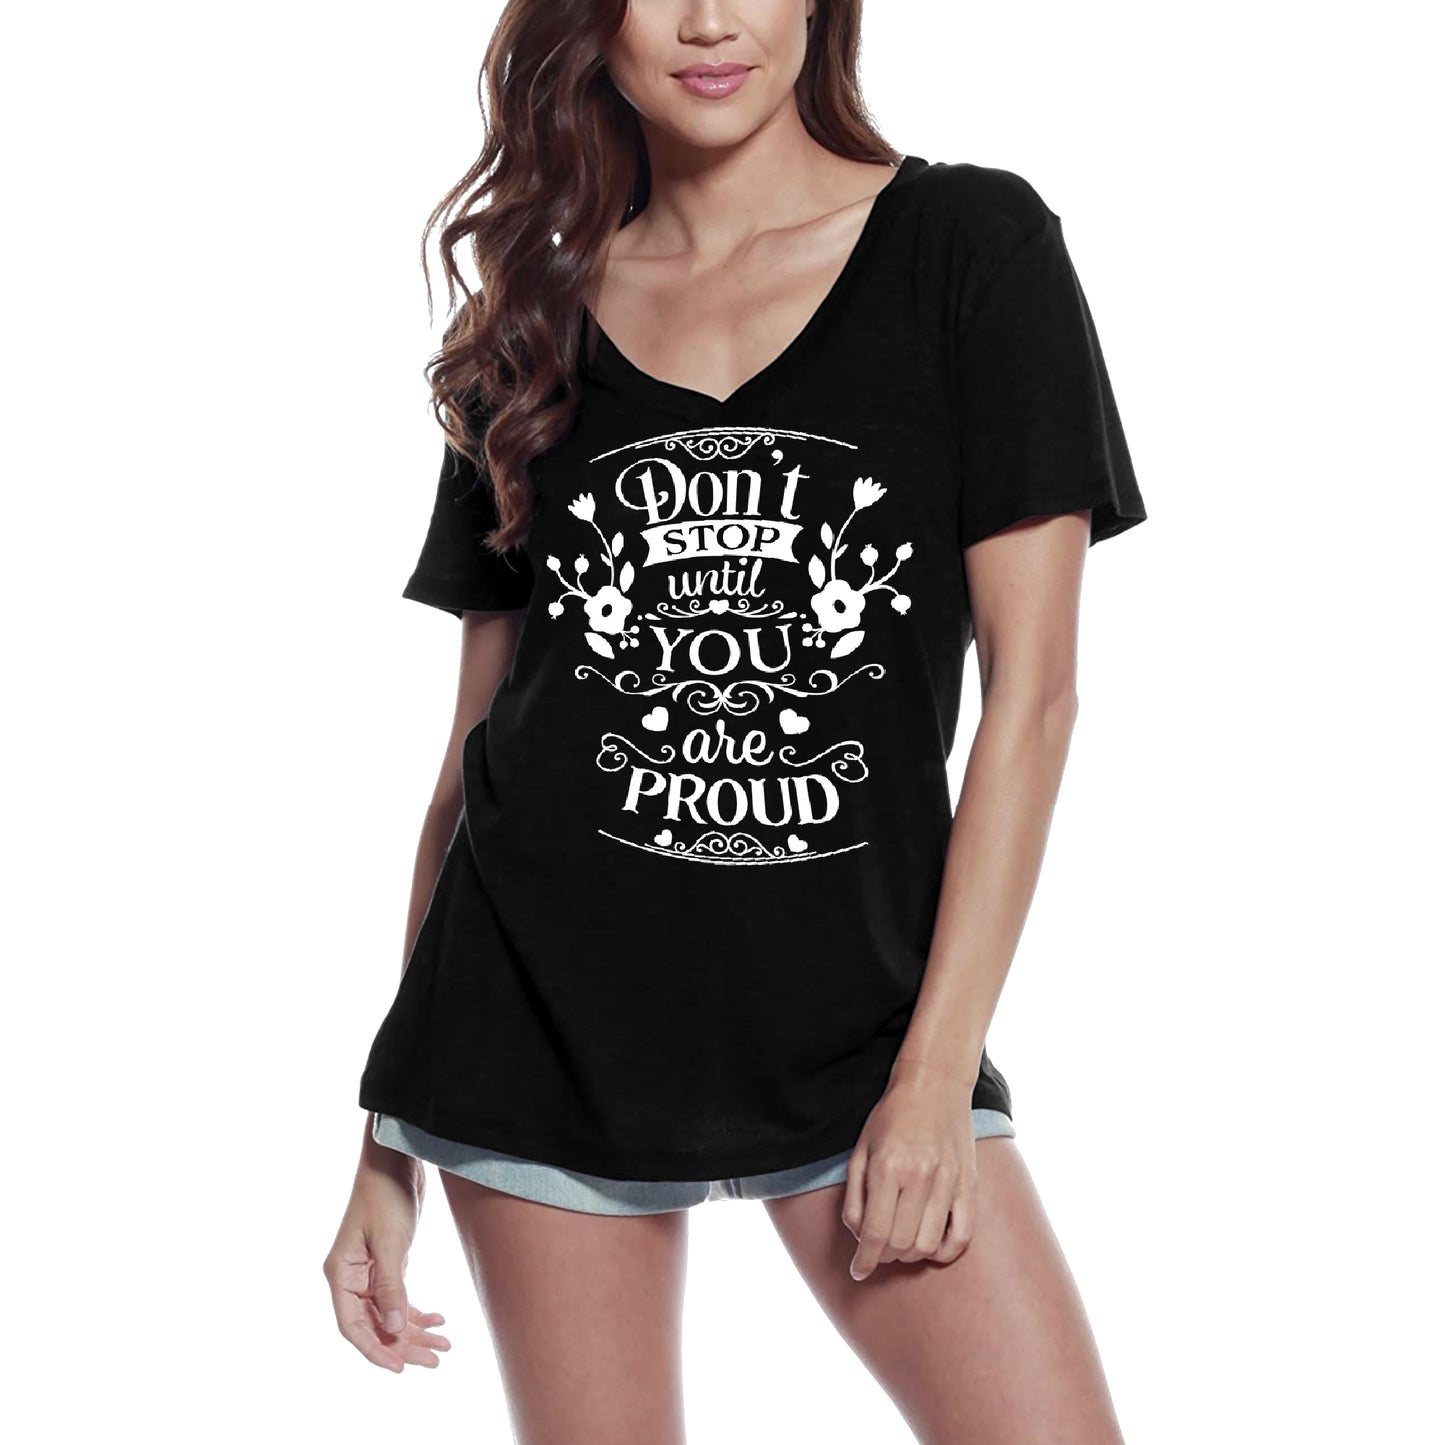 ULTRABASIC Women's T-Shirt Don't Stop Until You are Proud - Short Sleeve Tee Shirt Tops